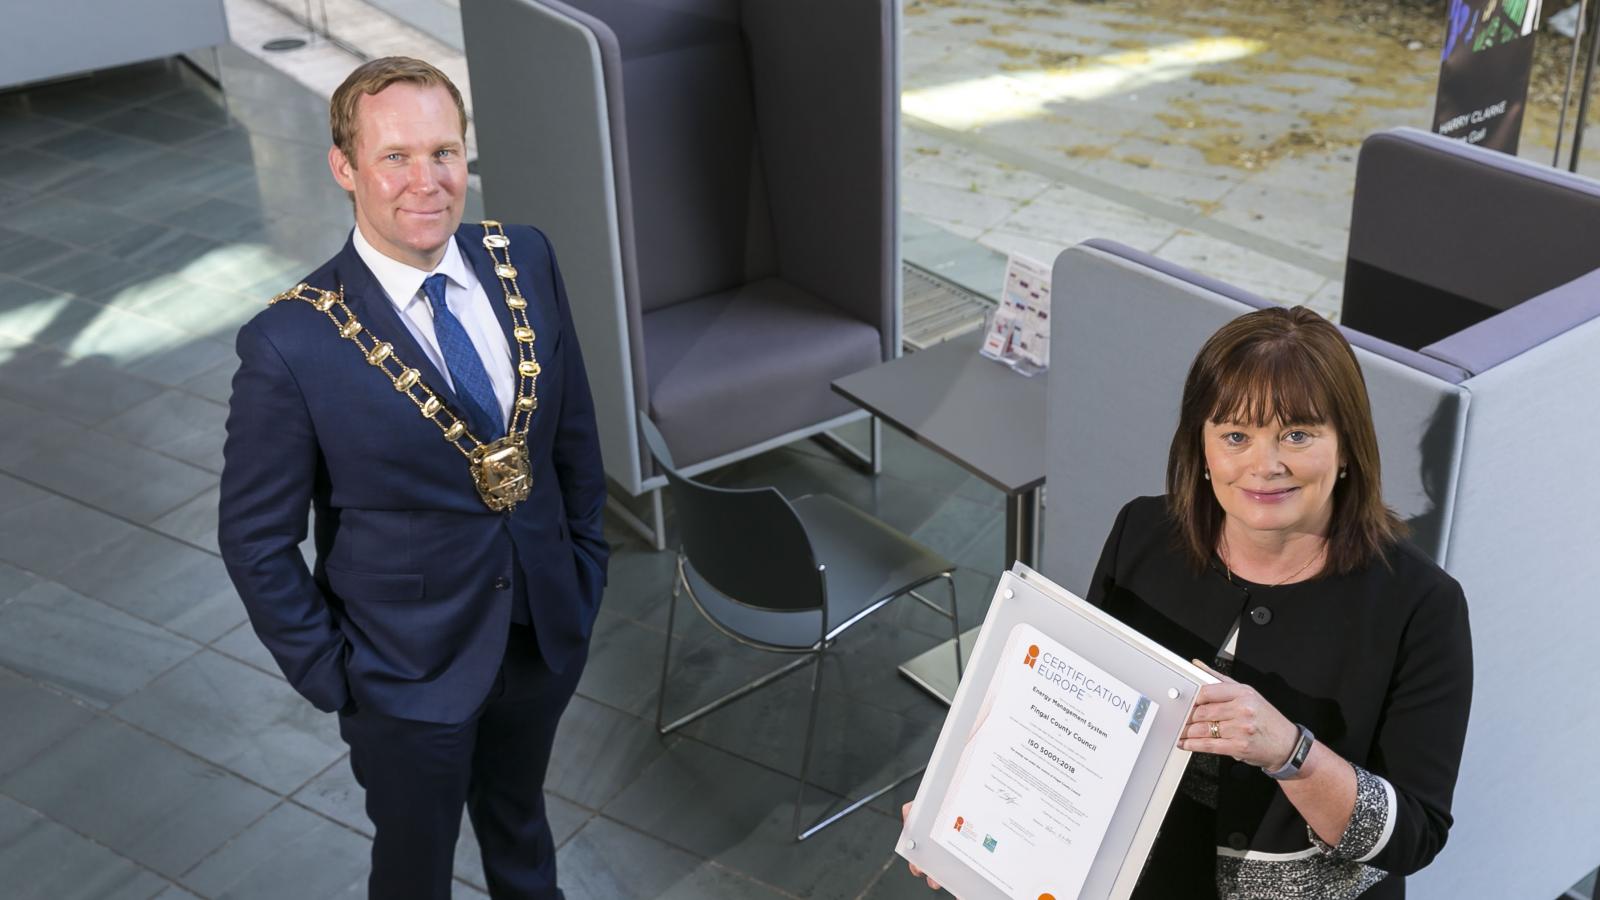 The Mayor of Fingal, Cllr Eoghan O’Brien, and the Chief Executive of Fingal County Council, AnnMarie Farrelly, pictured with the ISO50001 Certificate which the Council has received from Certification Europe for its Energy Management System.